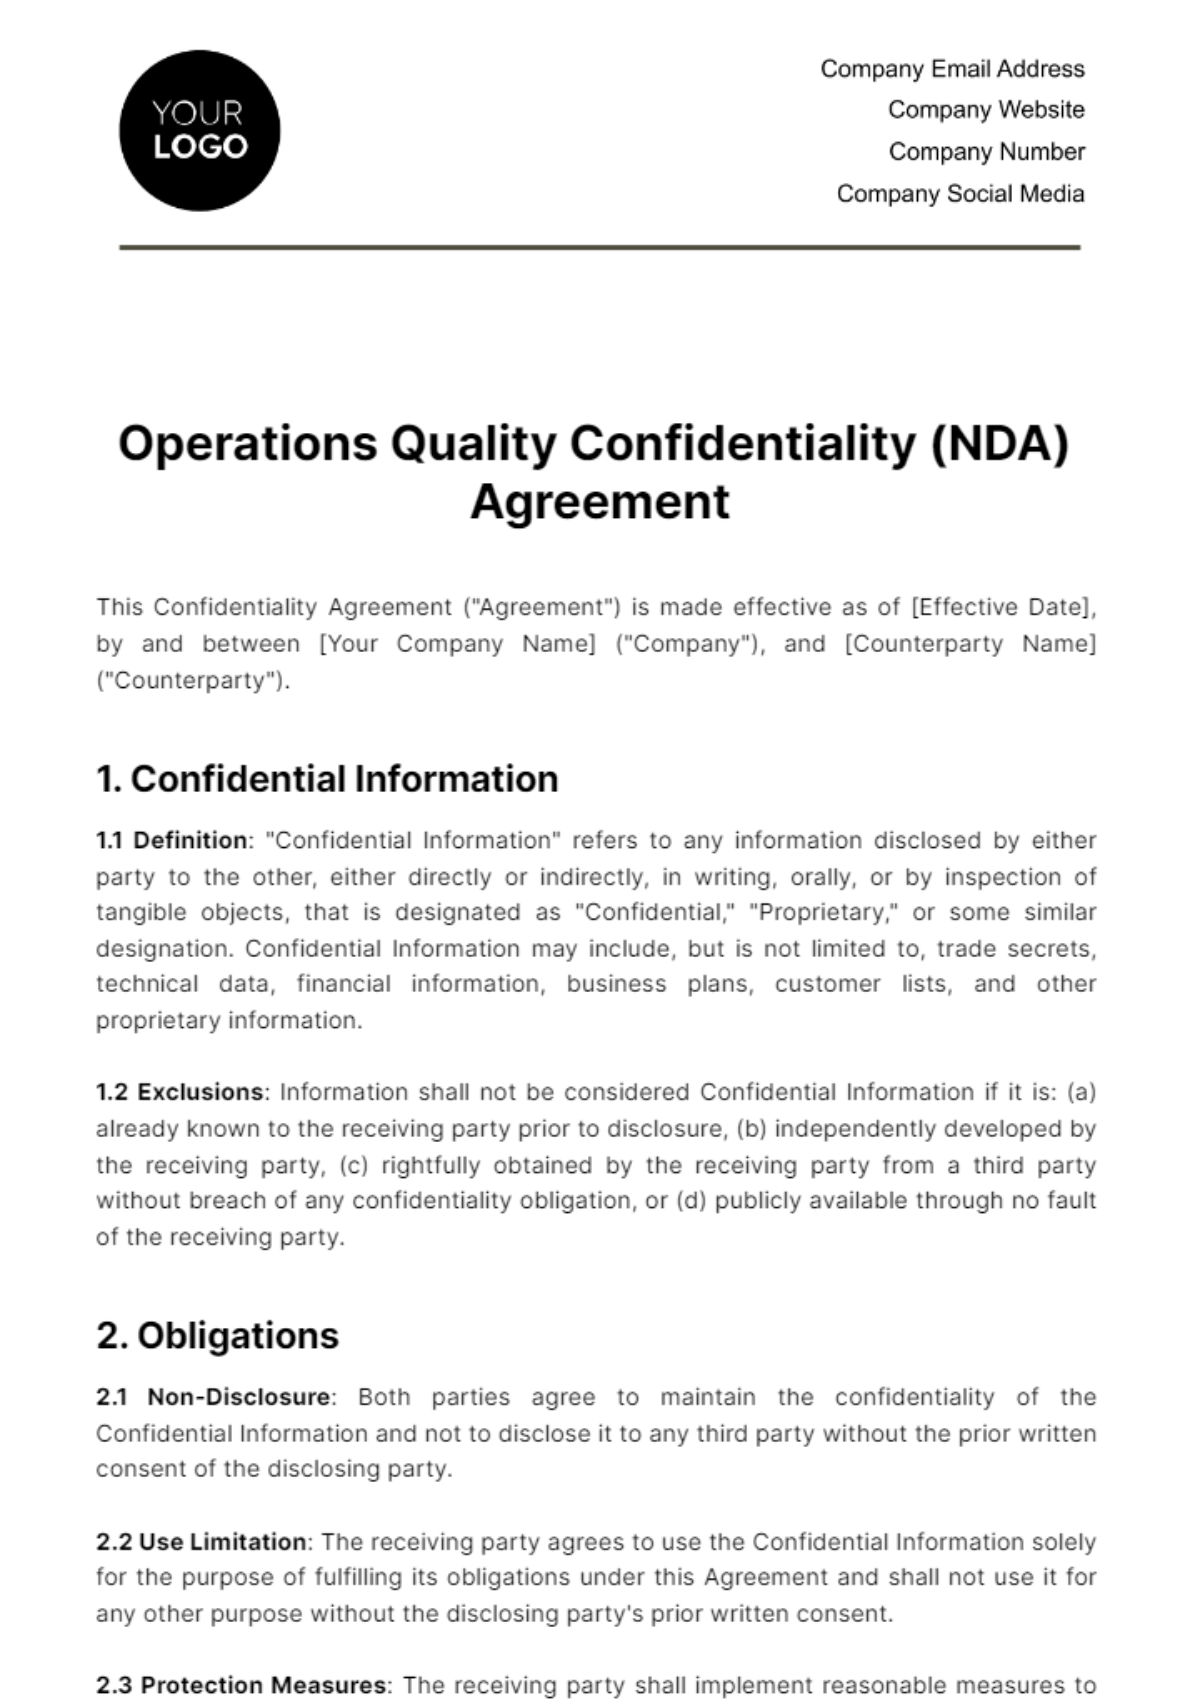 Operations Quality Confidentiality (NDA) Agreement Template